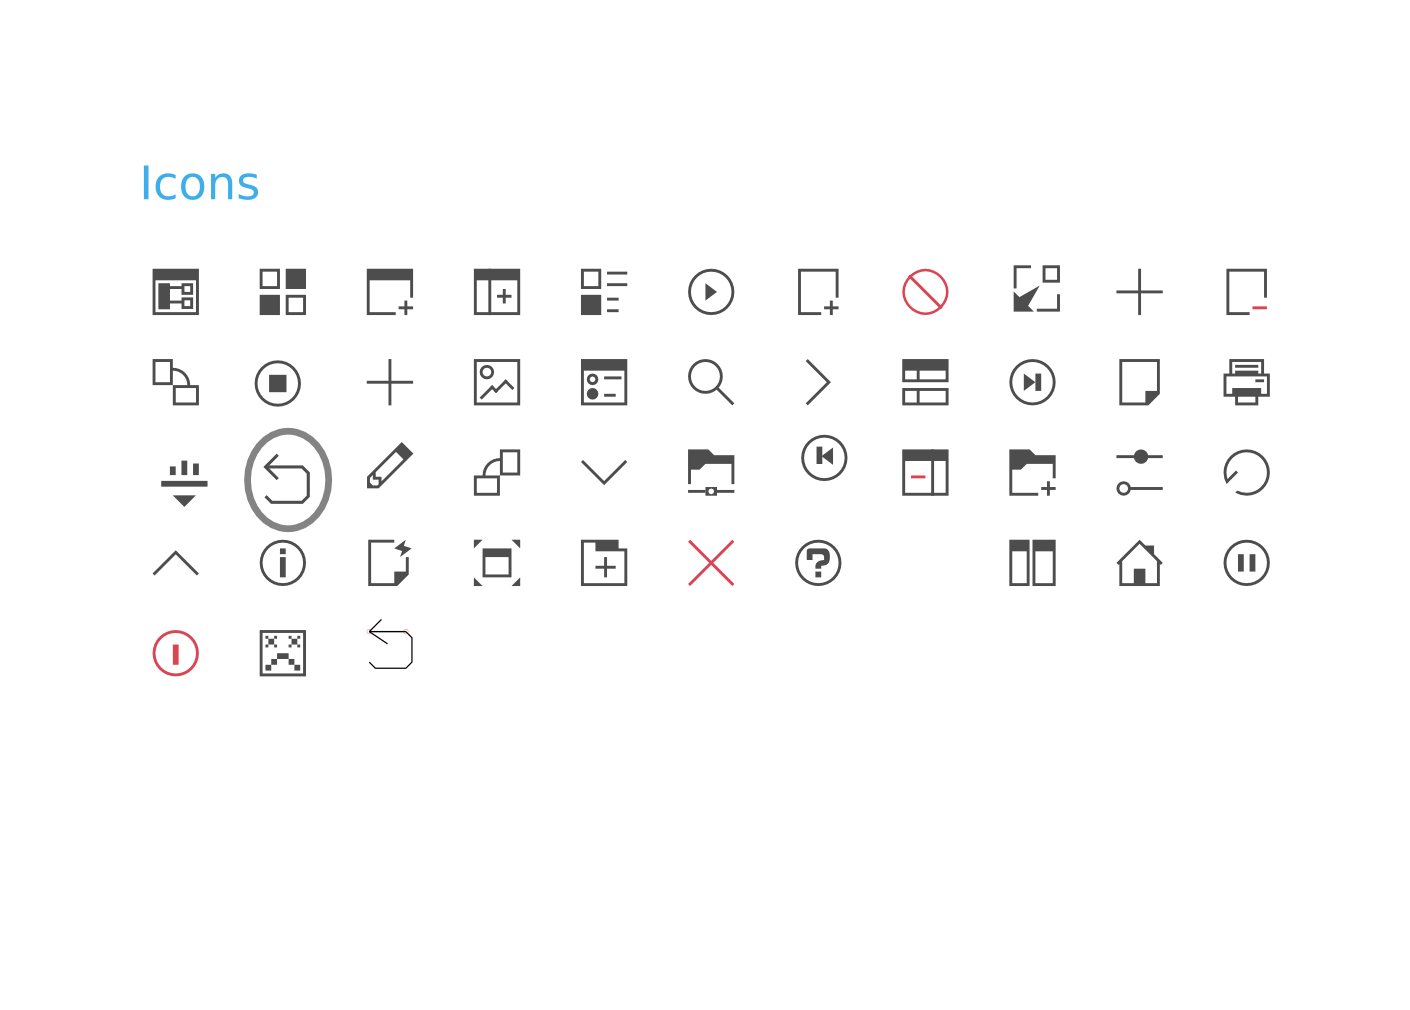 editor - Why are the Undo and Redo arrow icons commonly round 